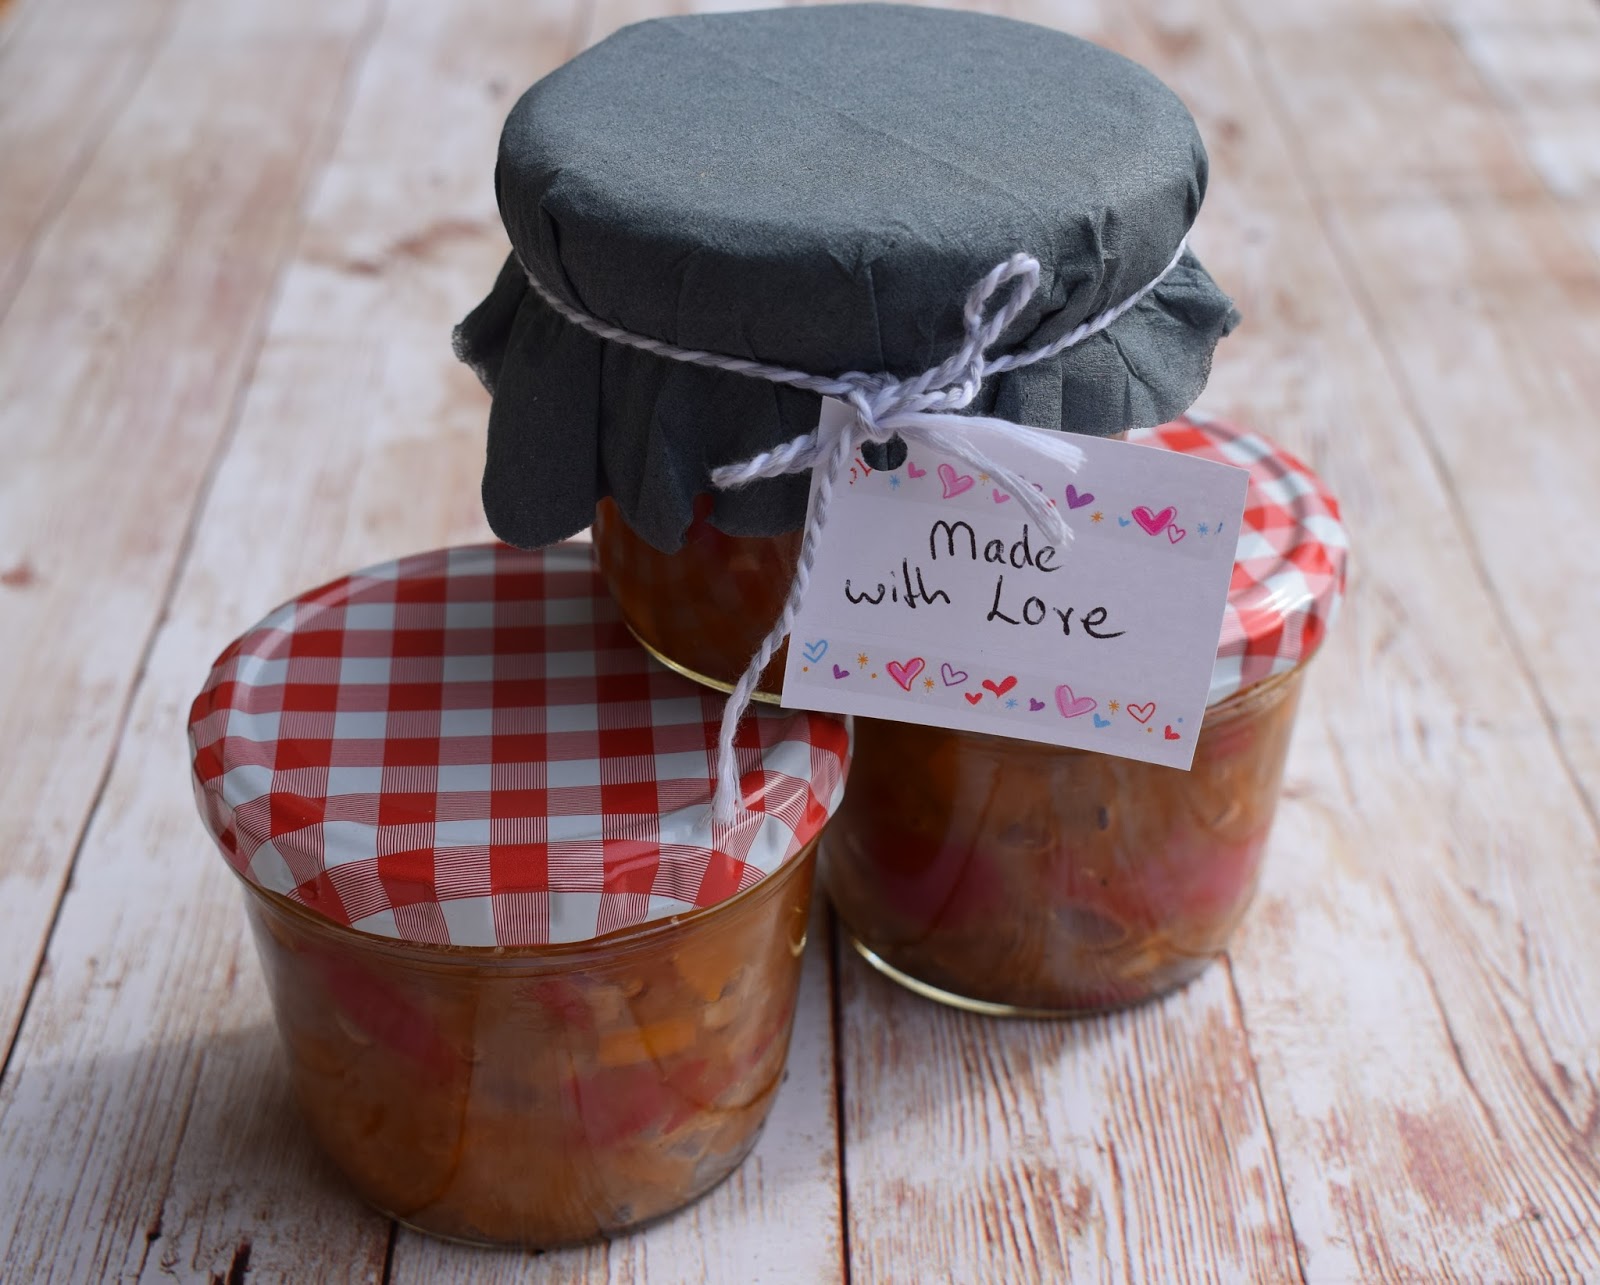 Zucchini-Paprika Chutney - Soni - Cooking with love